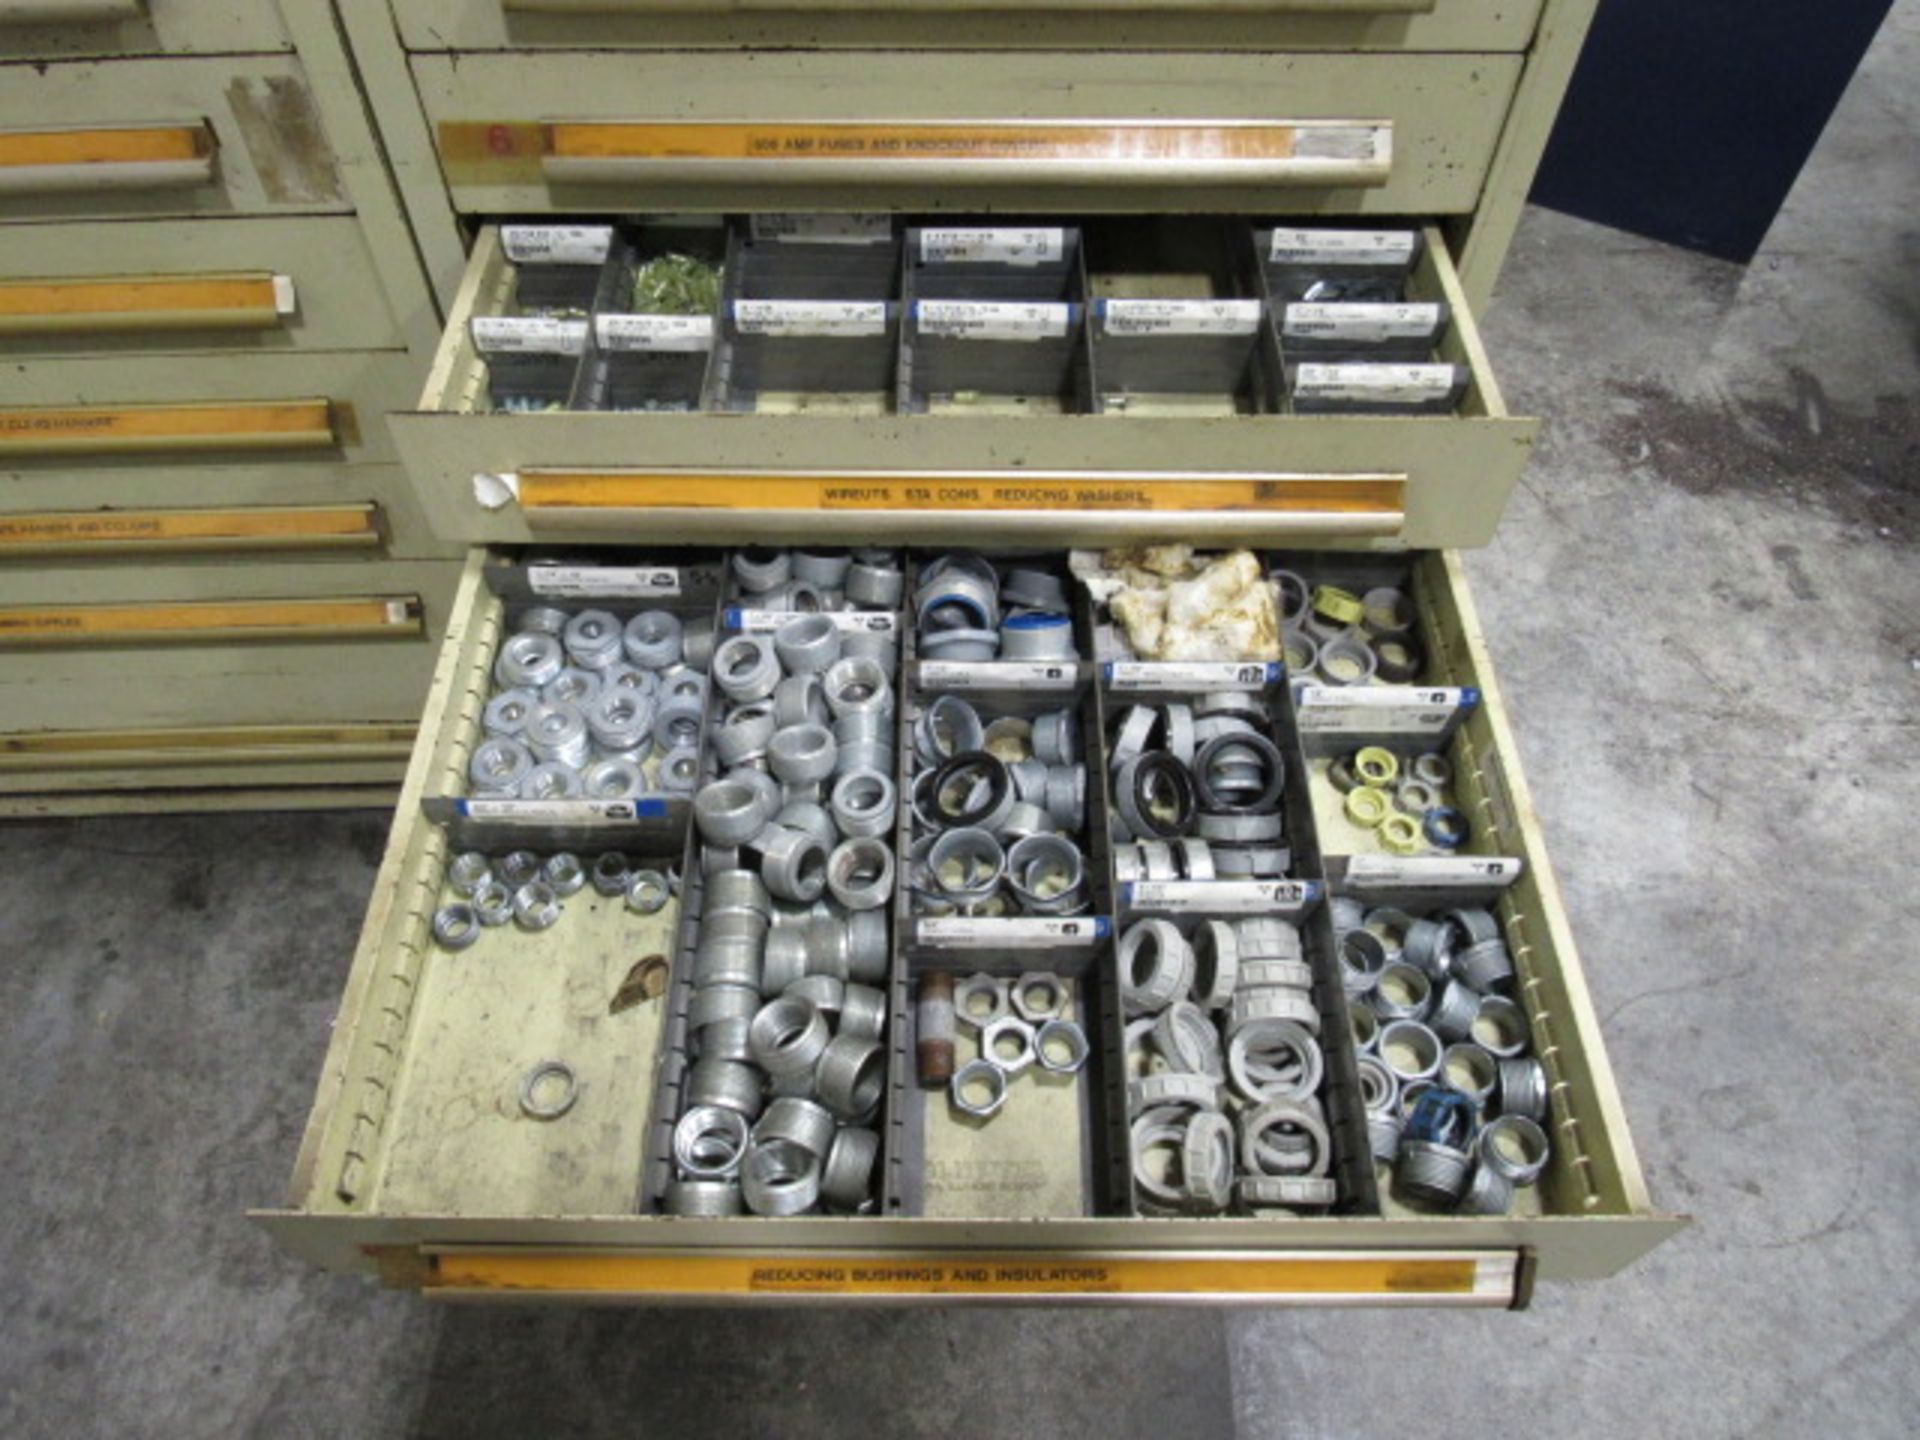 Equipto 10 Drawer Tool Cabinet - Image 3 of 6